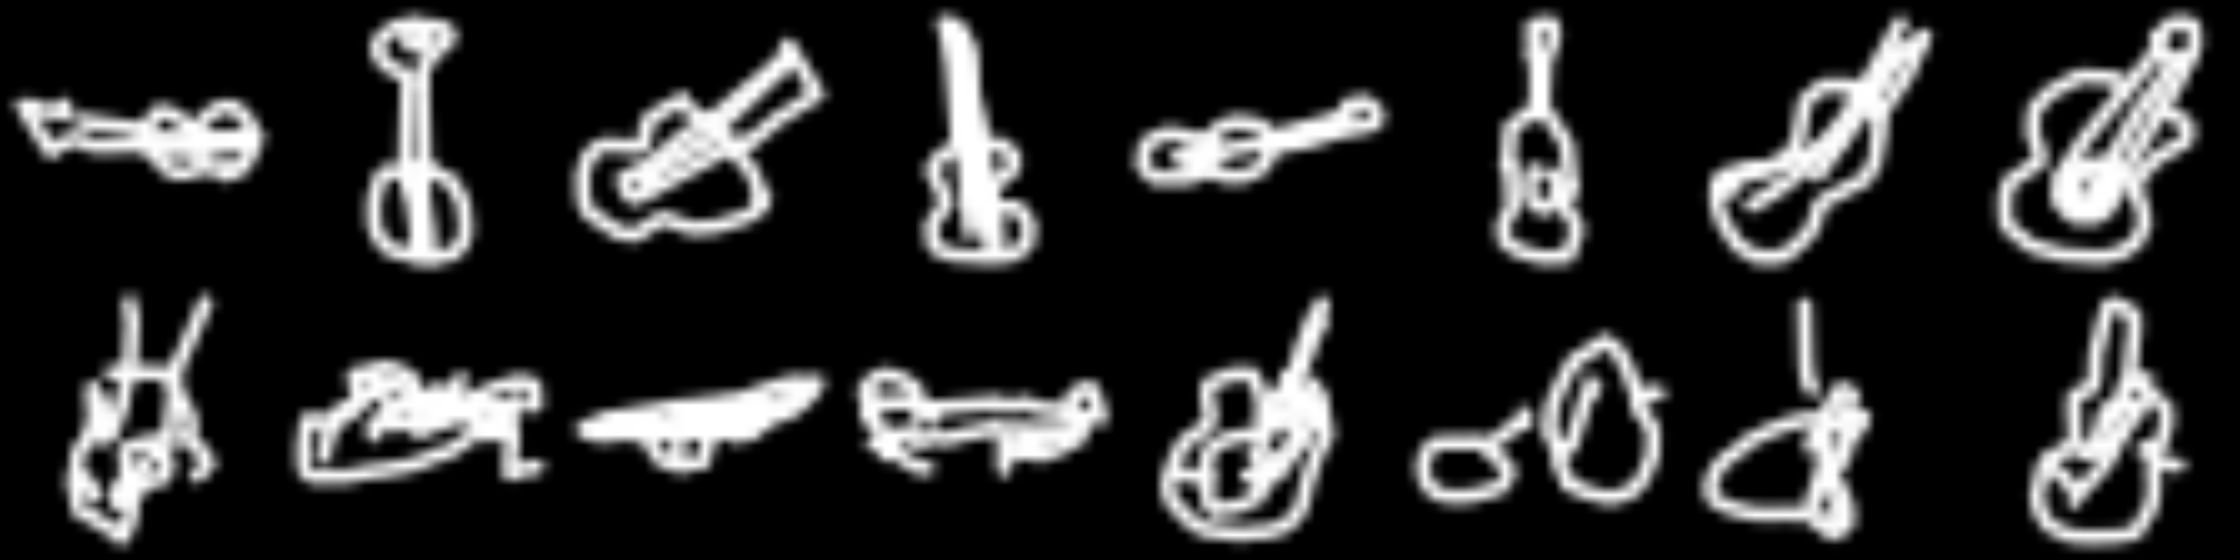 Fig. 7: Guitars, drawn by people (top row) and the network (bottom row).